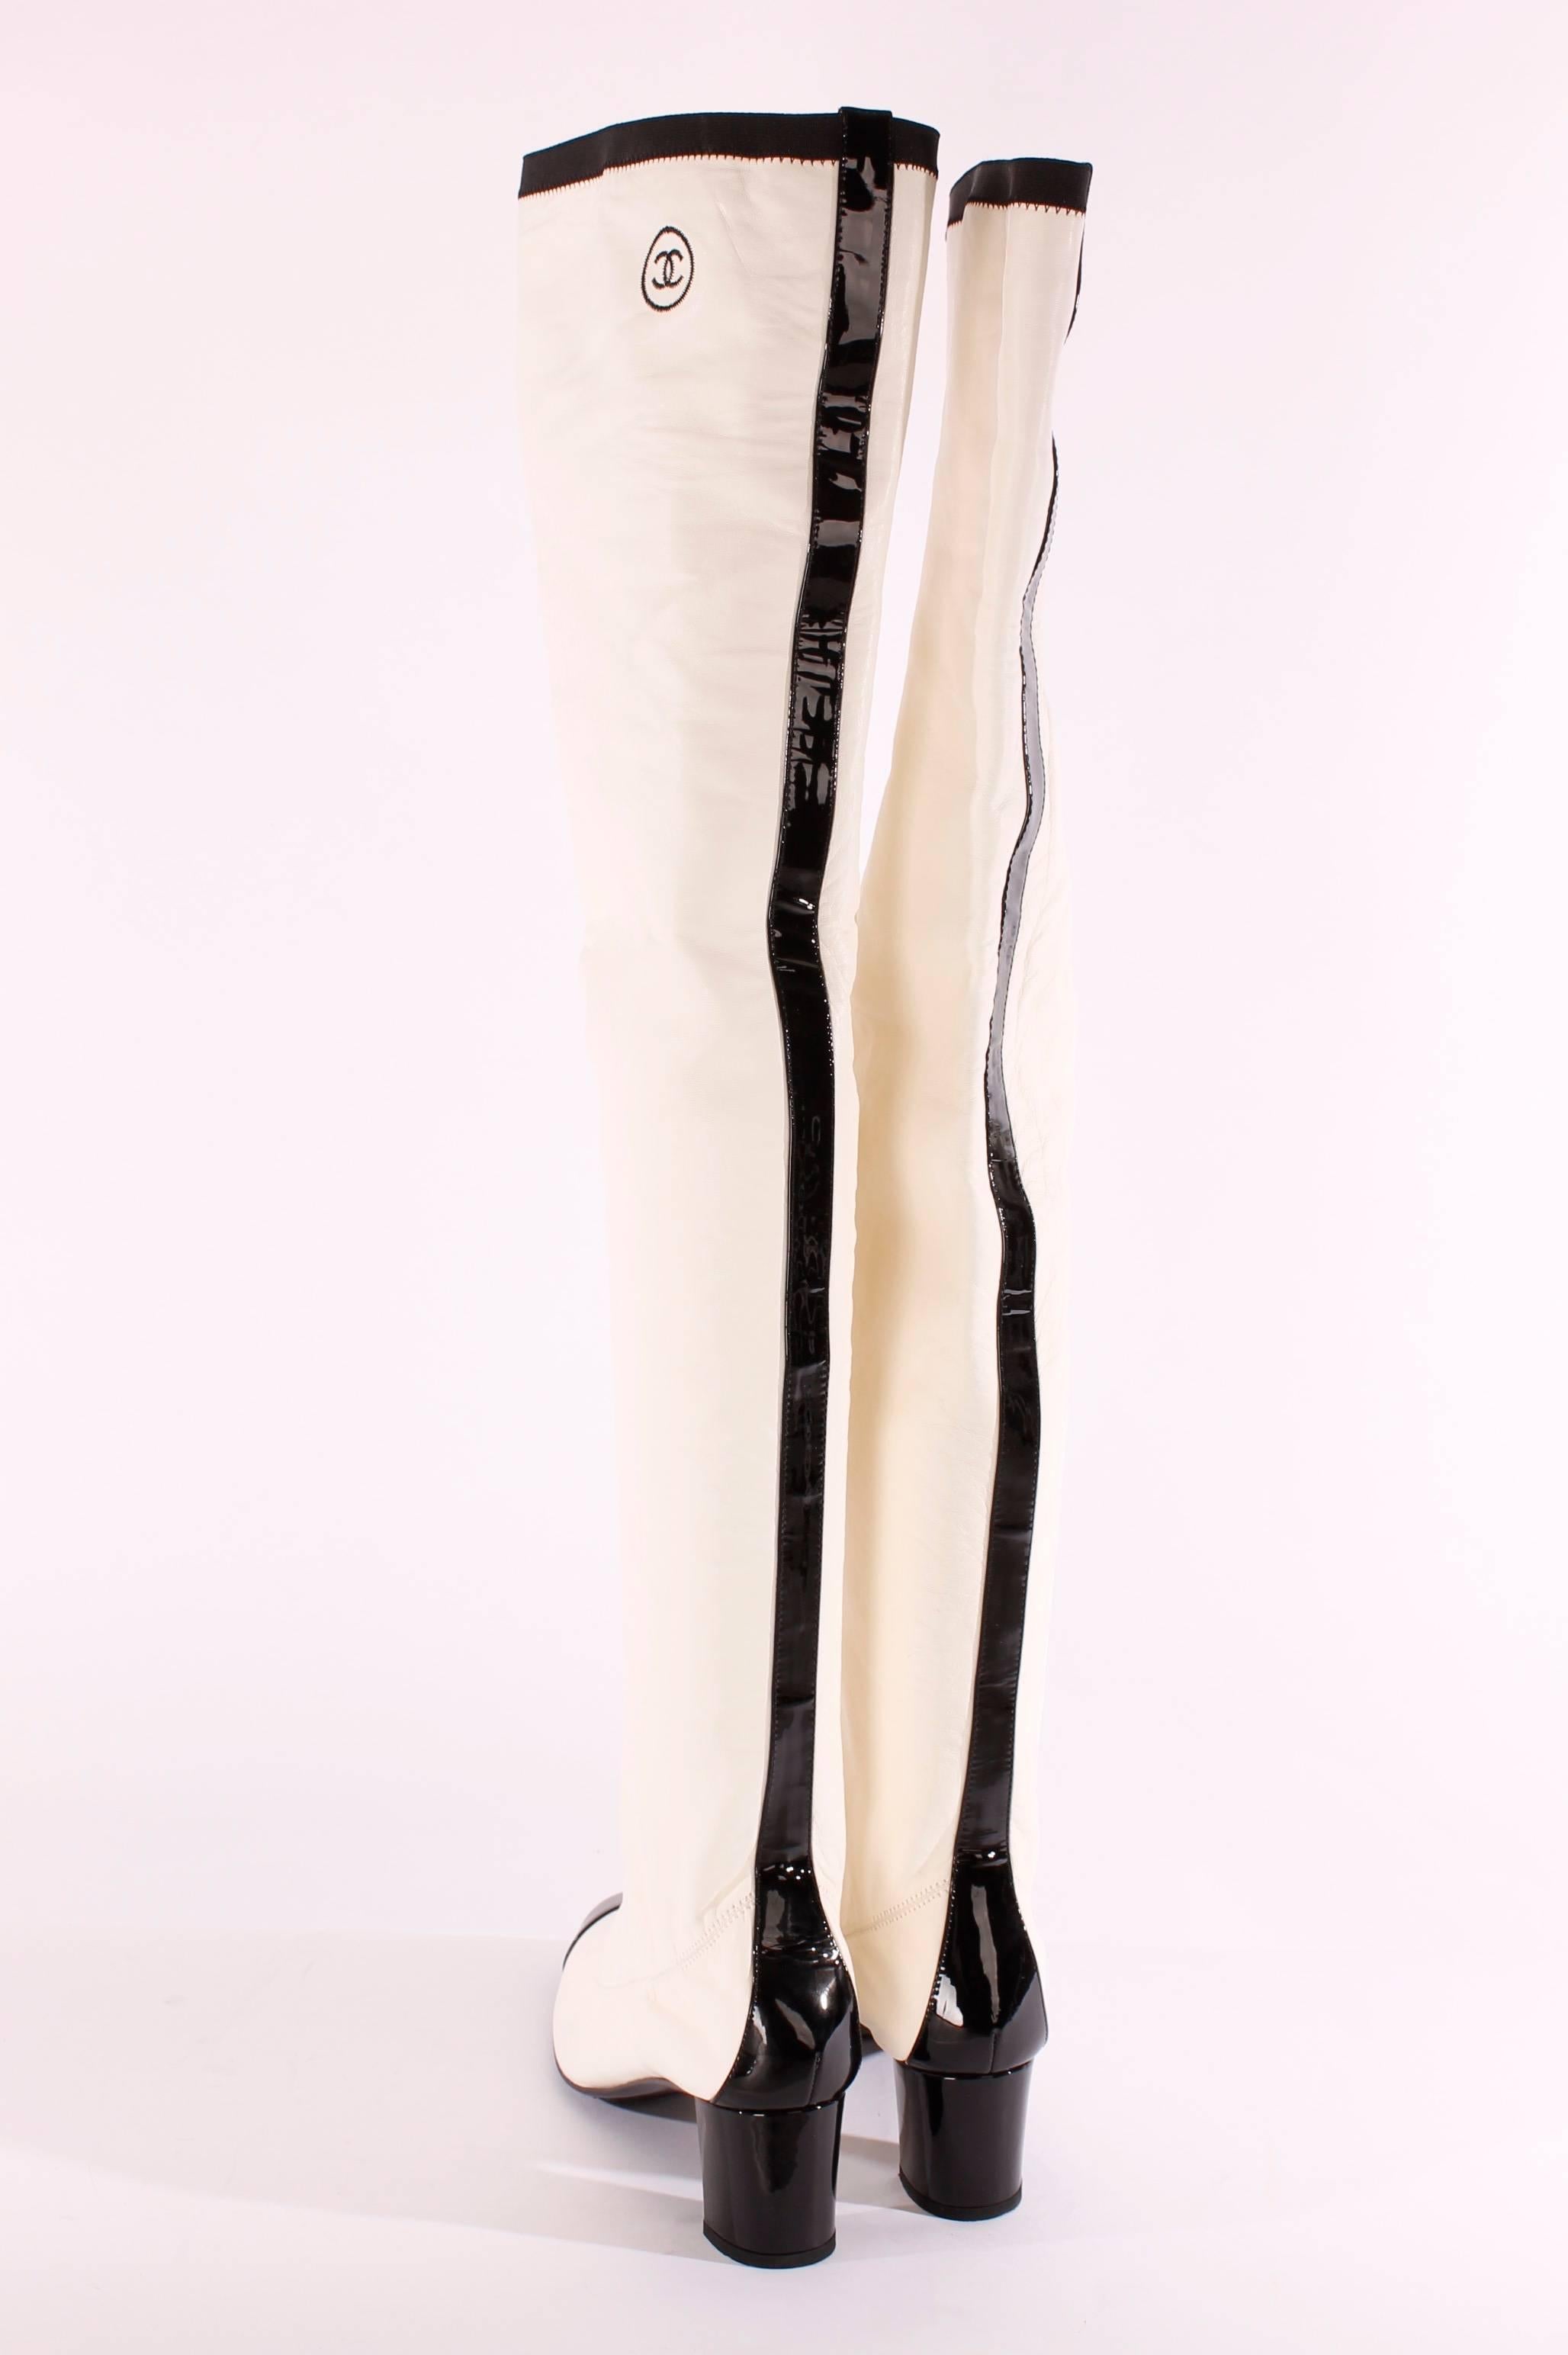 Chanel Runway Ready-to-Wear piece of the Autumn 2006/2007 collection! Very fashionable boots made of white leather with black details in patent leather.

The shaft of these overknee boots is 65 centimeters long, a little piece of elastic strap in